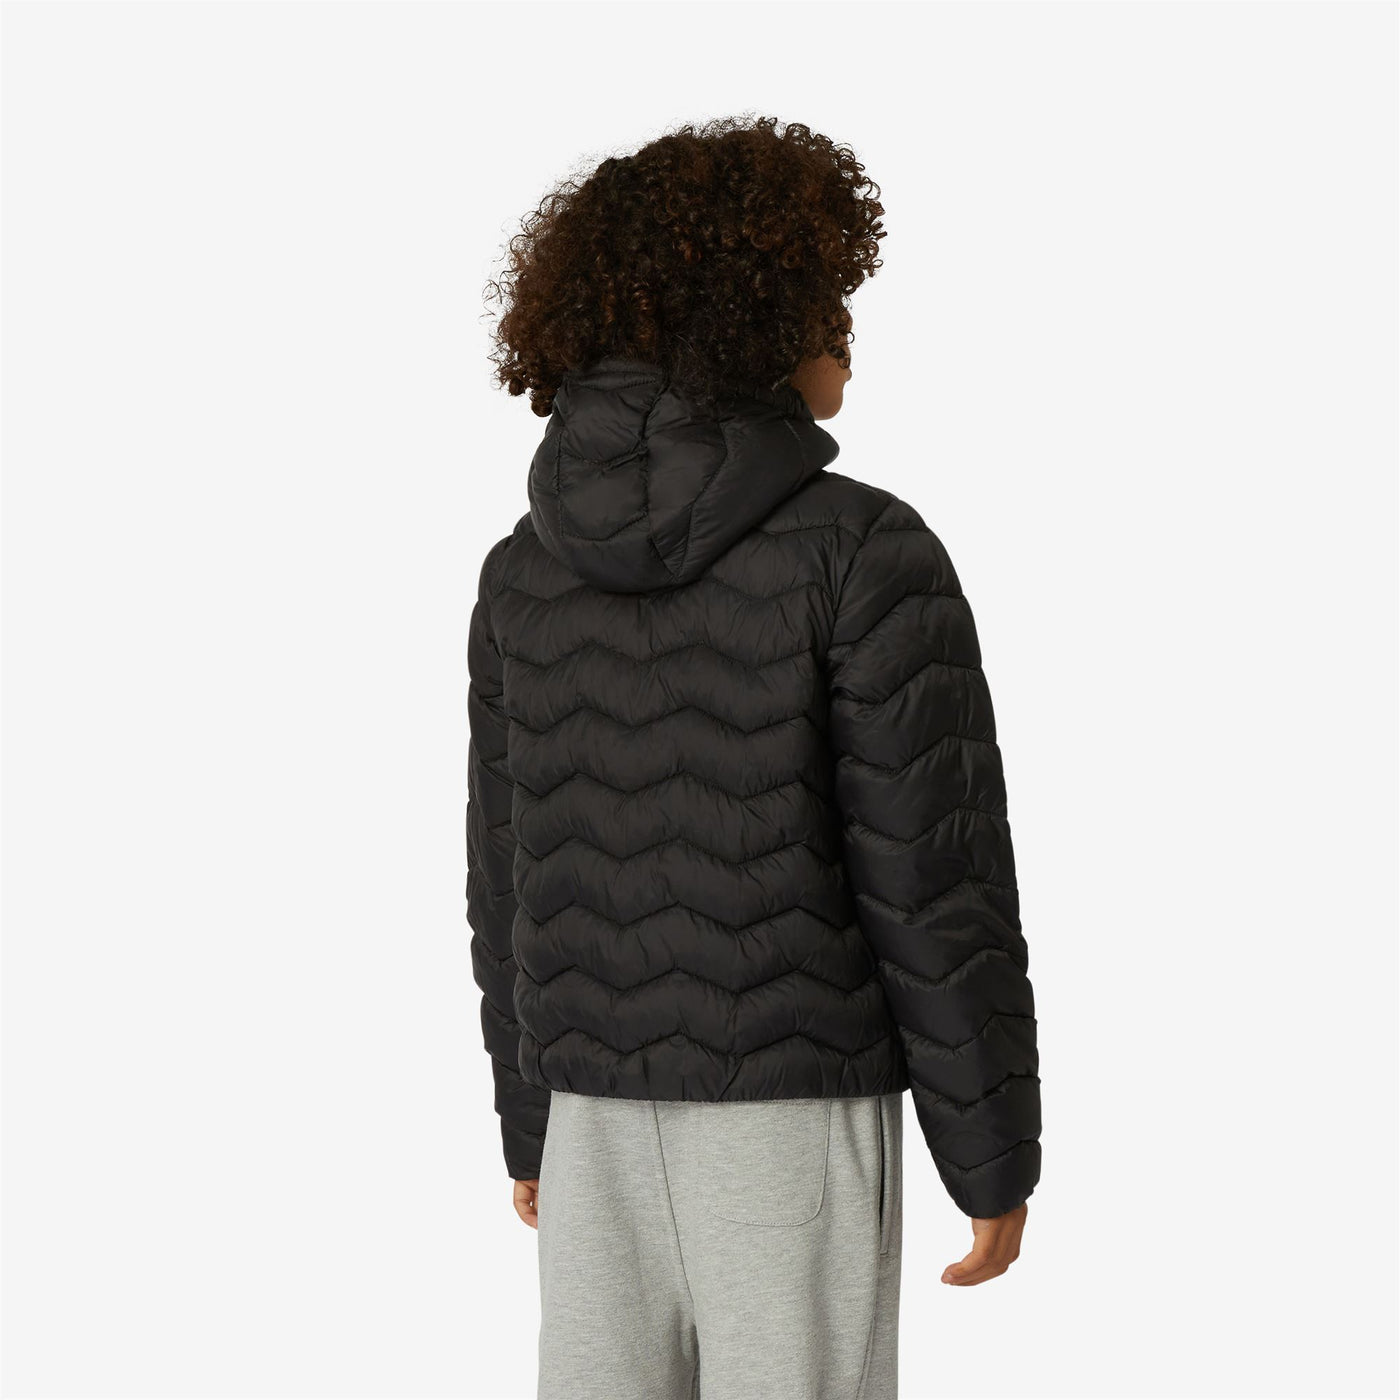 Jackets Boy P. JACK QUILTED WARM Short BLACK PURE Dressed Front Double		